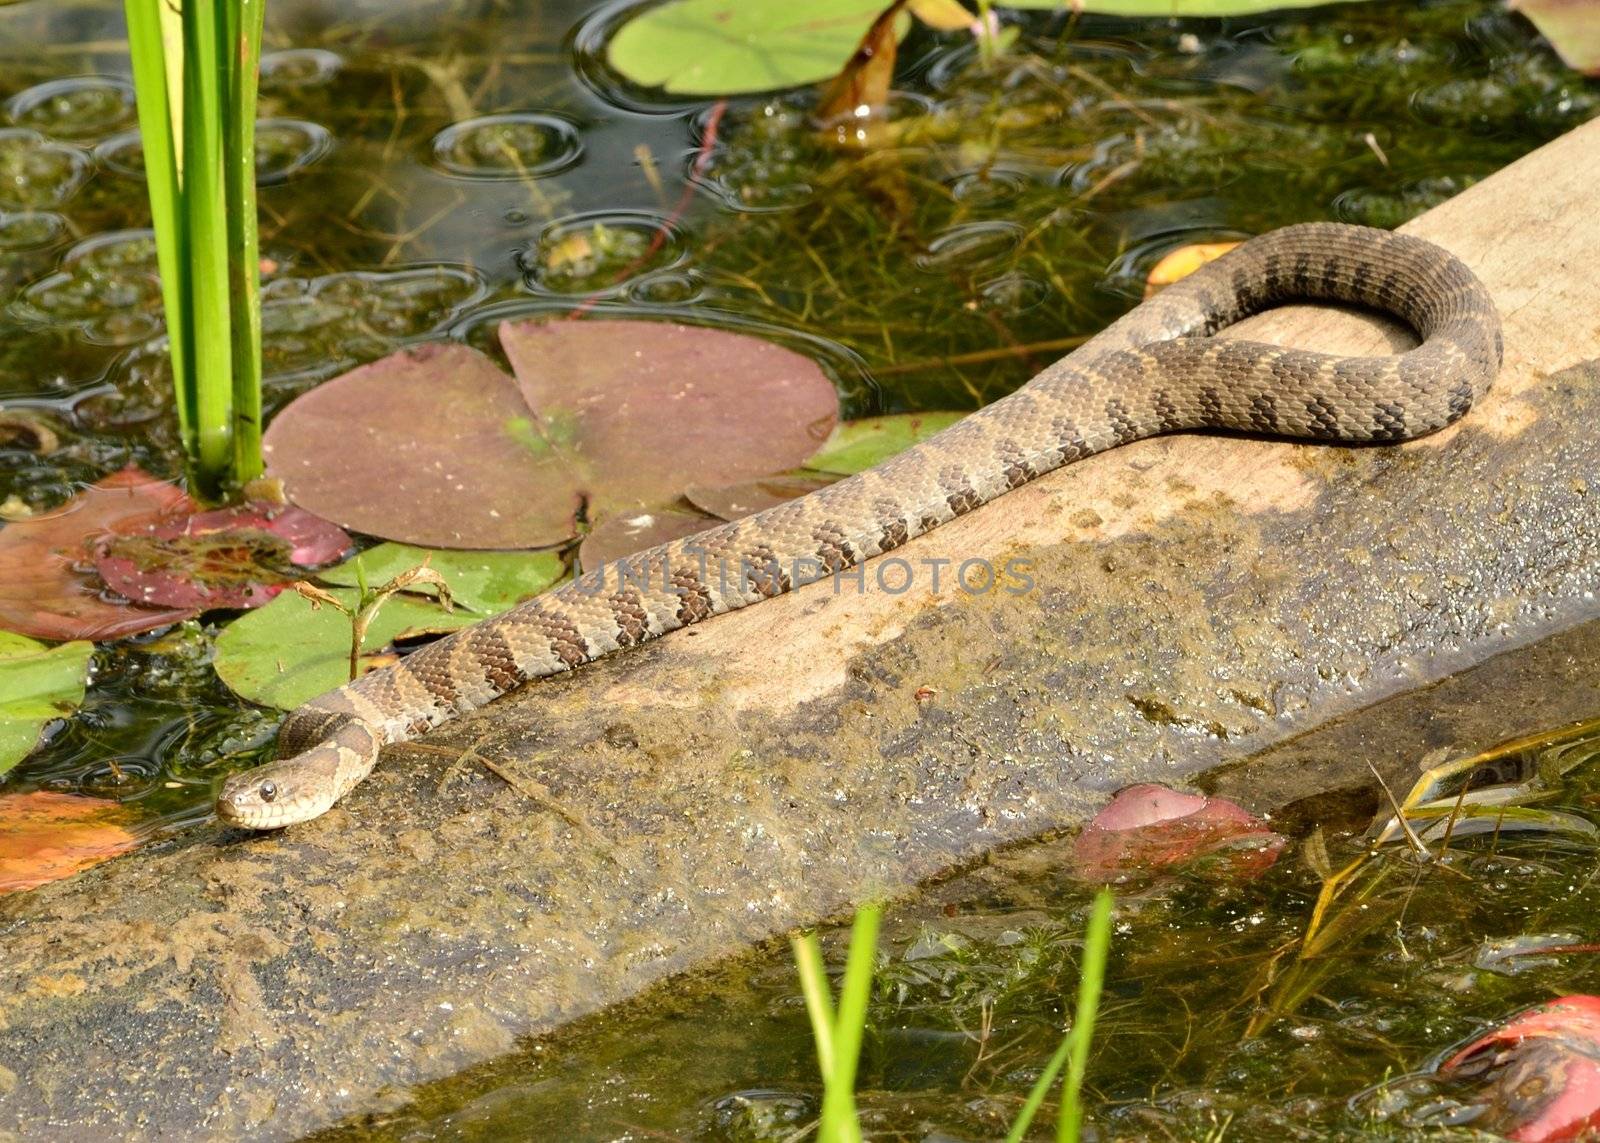 Northern Water Snake perched on a log warming in the sun.